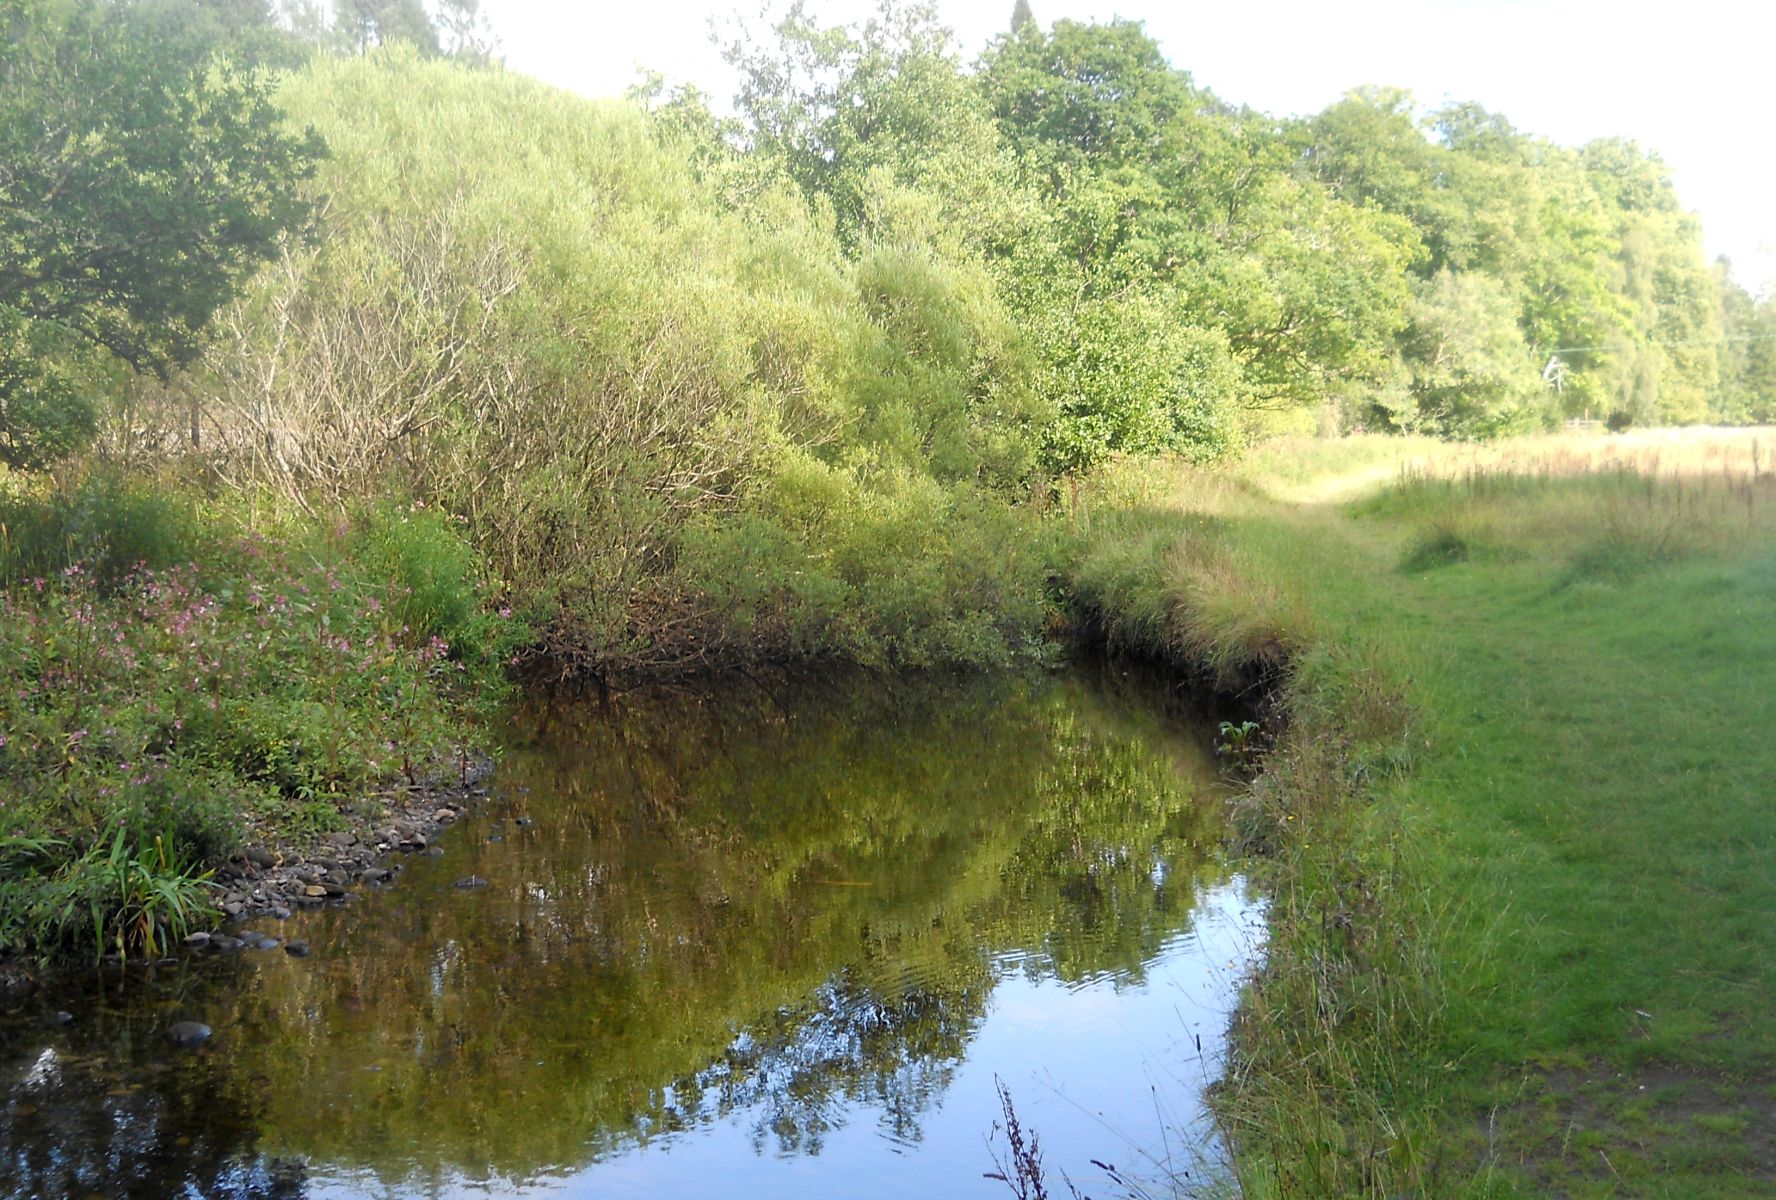 Blane Water on route to Dumgoyach